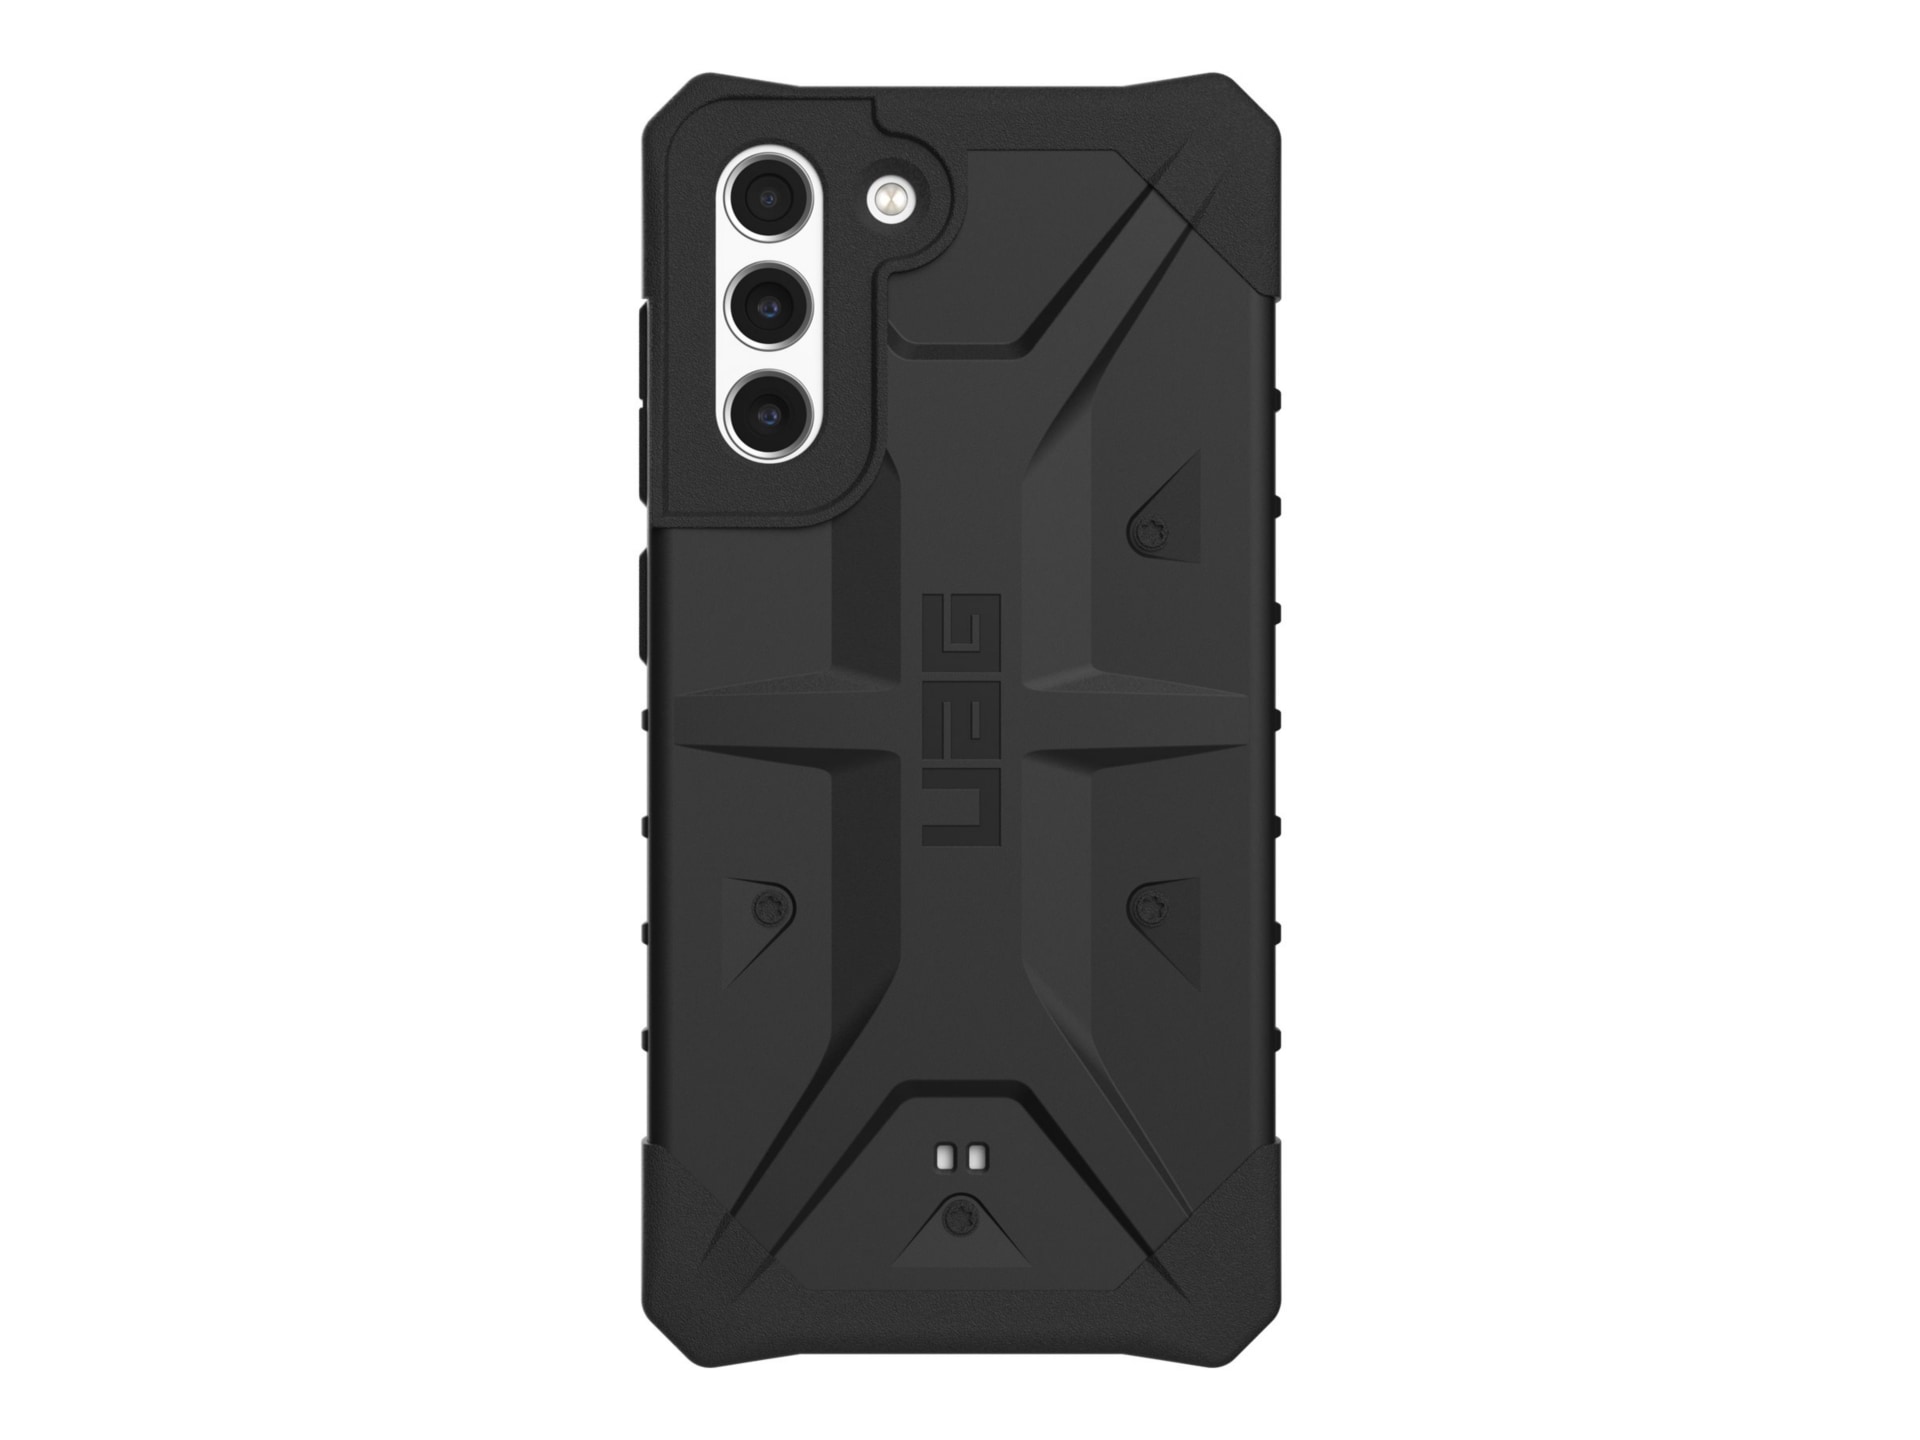 UAG Case for Samsung Galaxy S21 FE 5G (SM-G990) [6.4-inch] - Pathfinder Black - back cover for cell phone